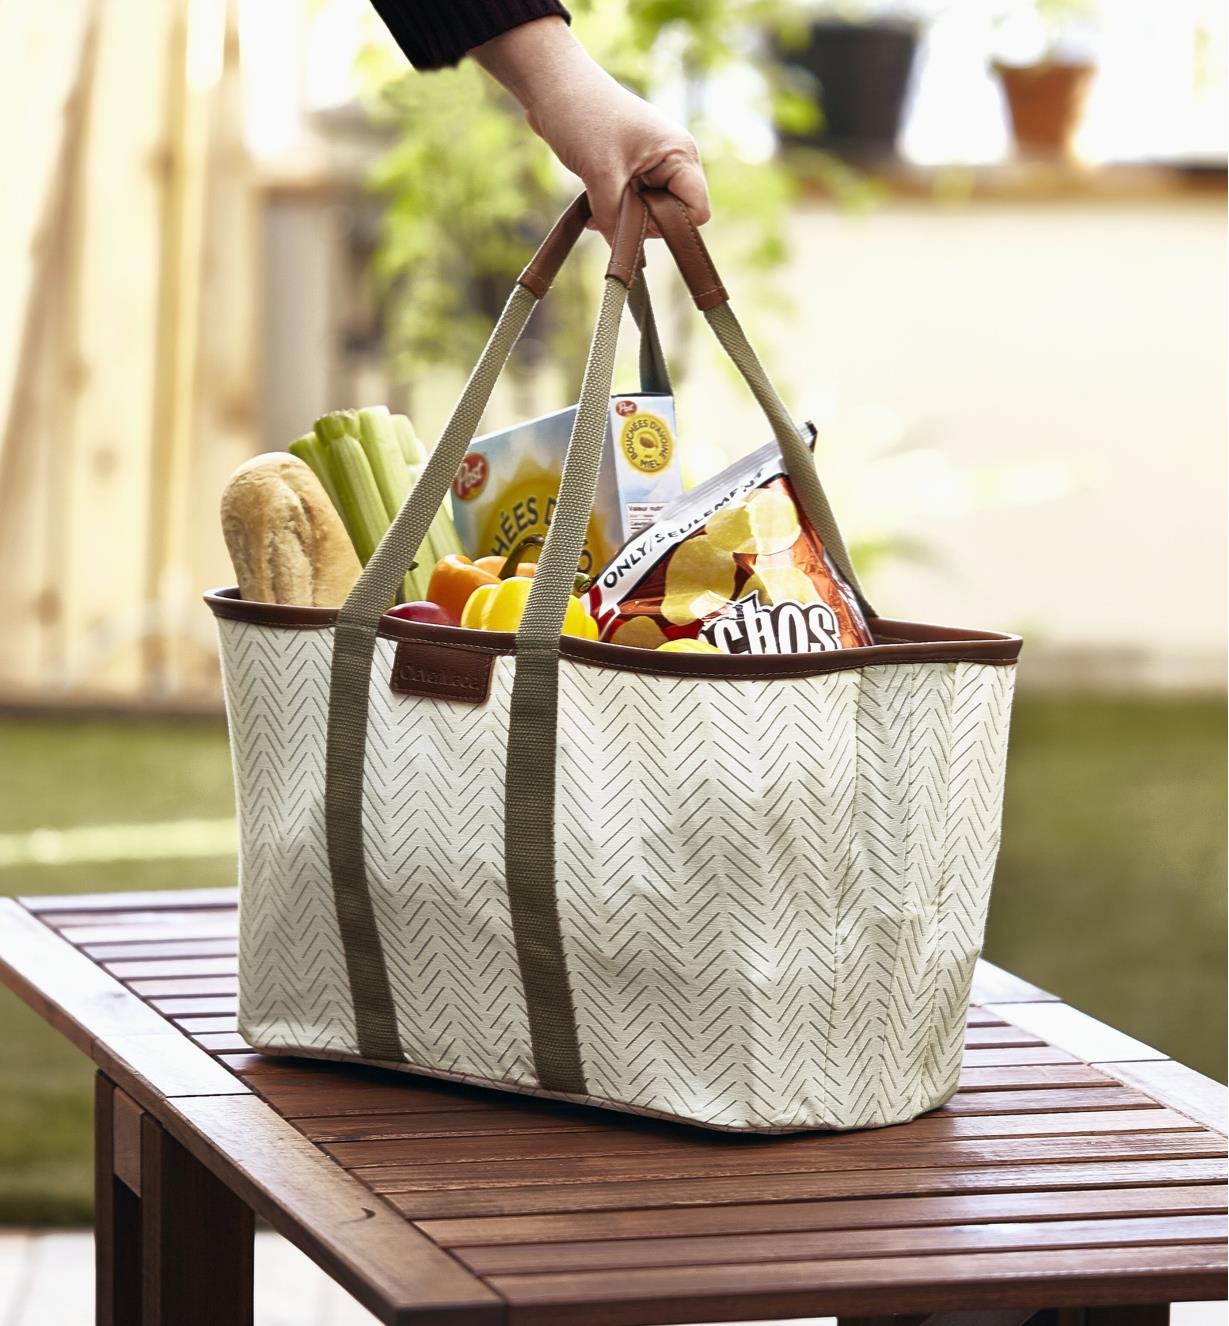 A person sets down a foldaway tote full of groceries on an outdoor table